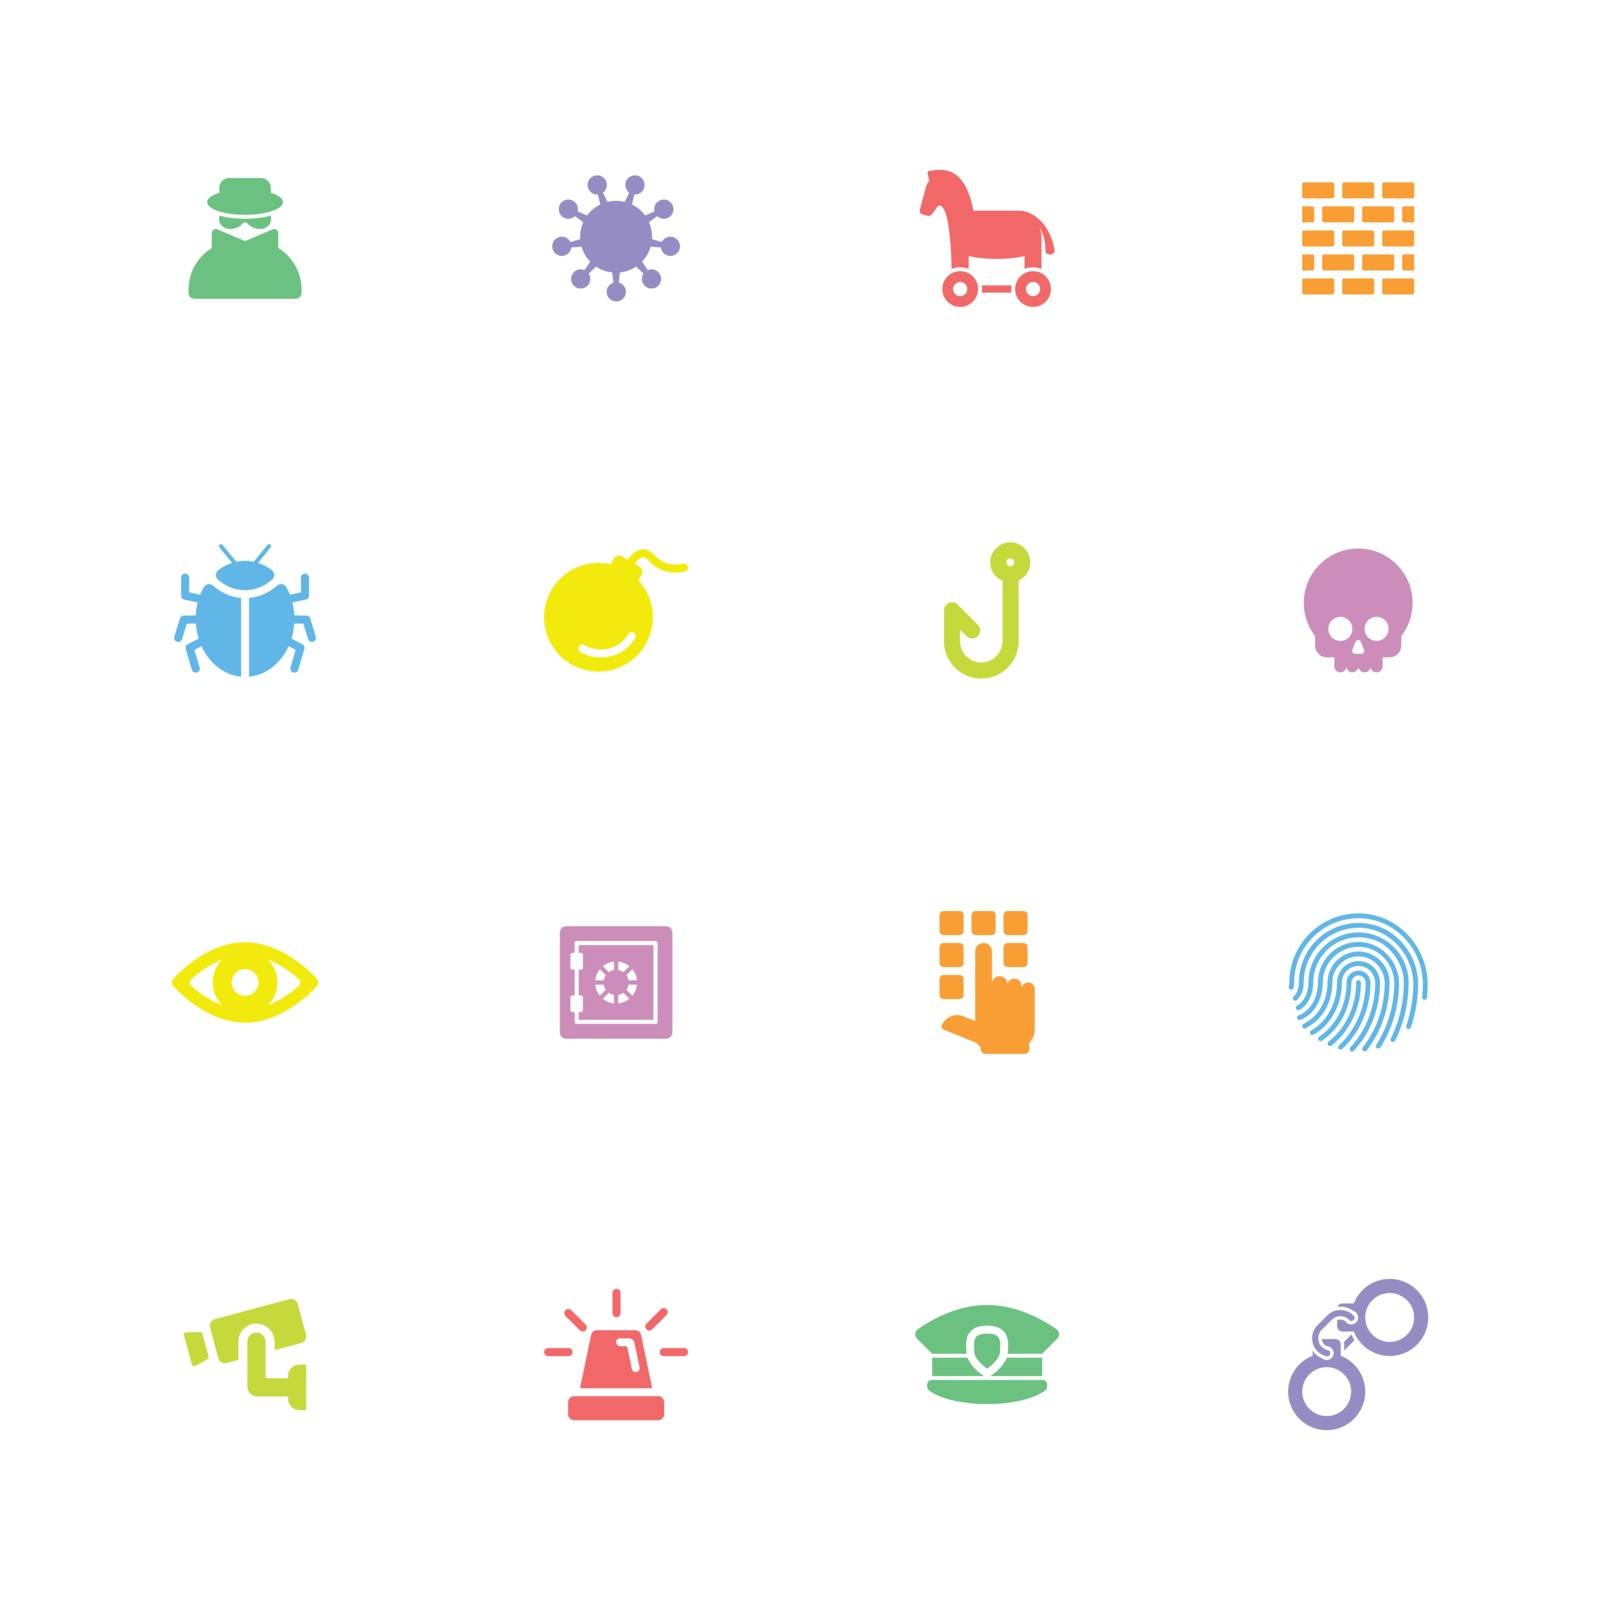 colorful simple flat icon set 7 for web design, user interface (UI), infographic and mobile application (apps)